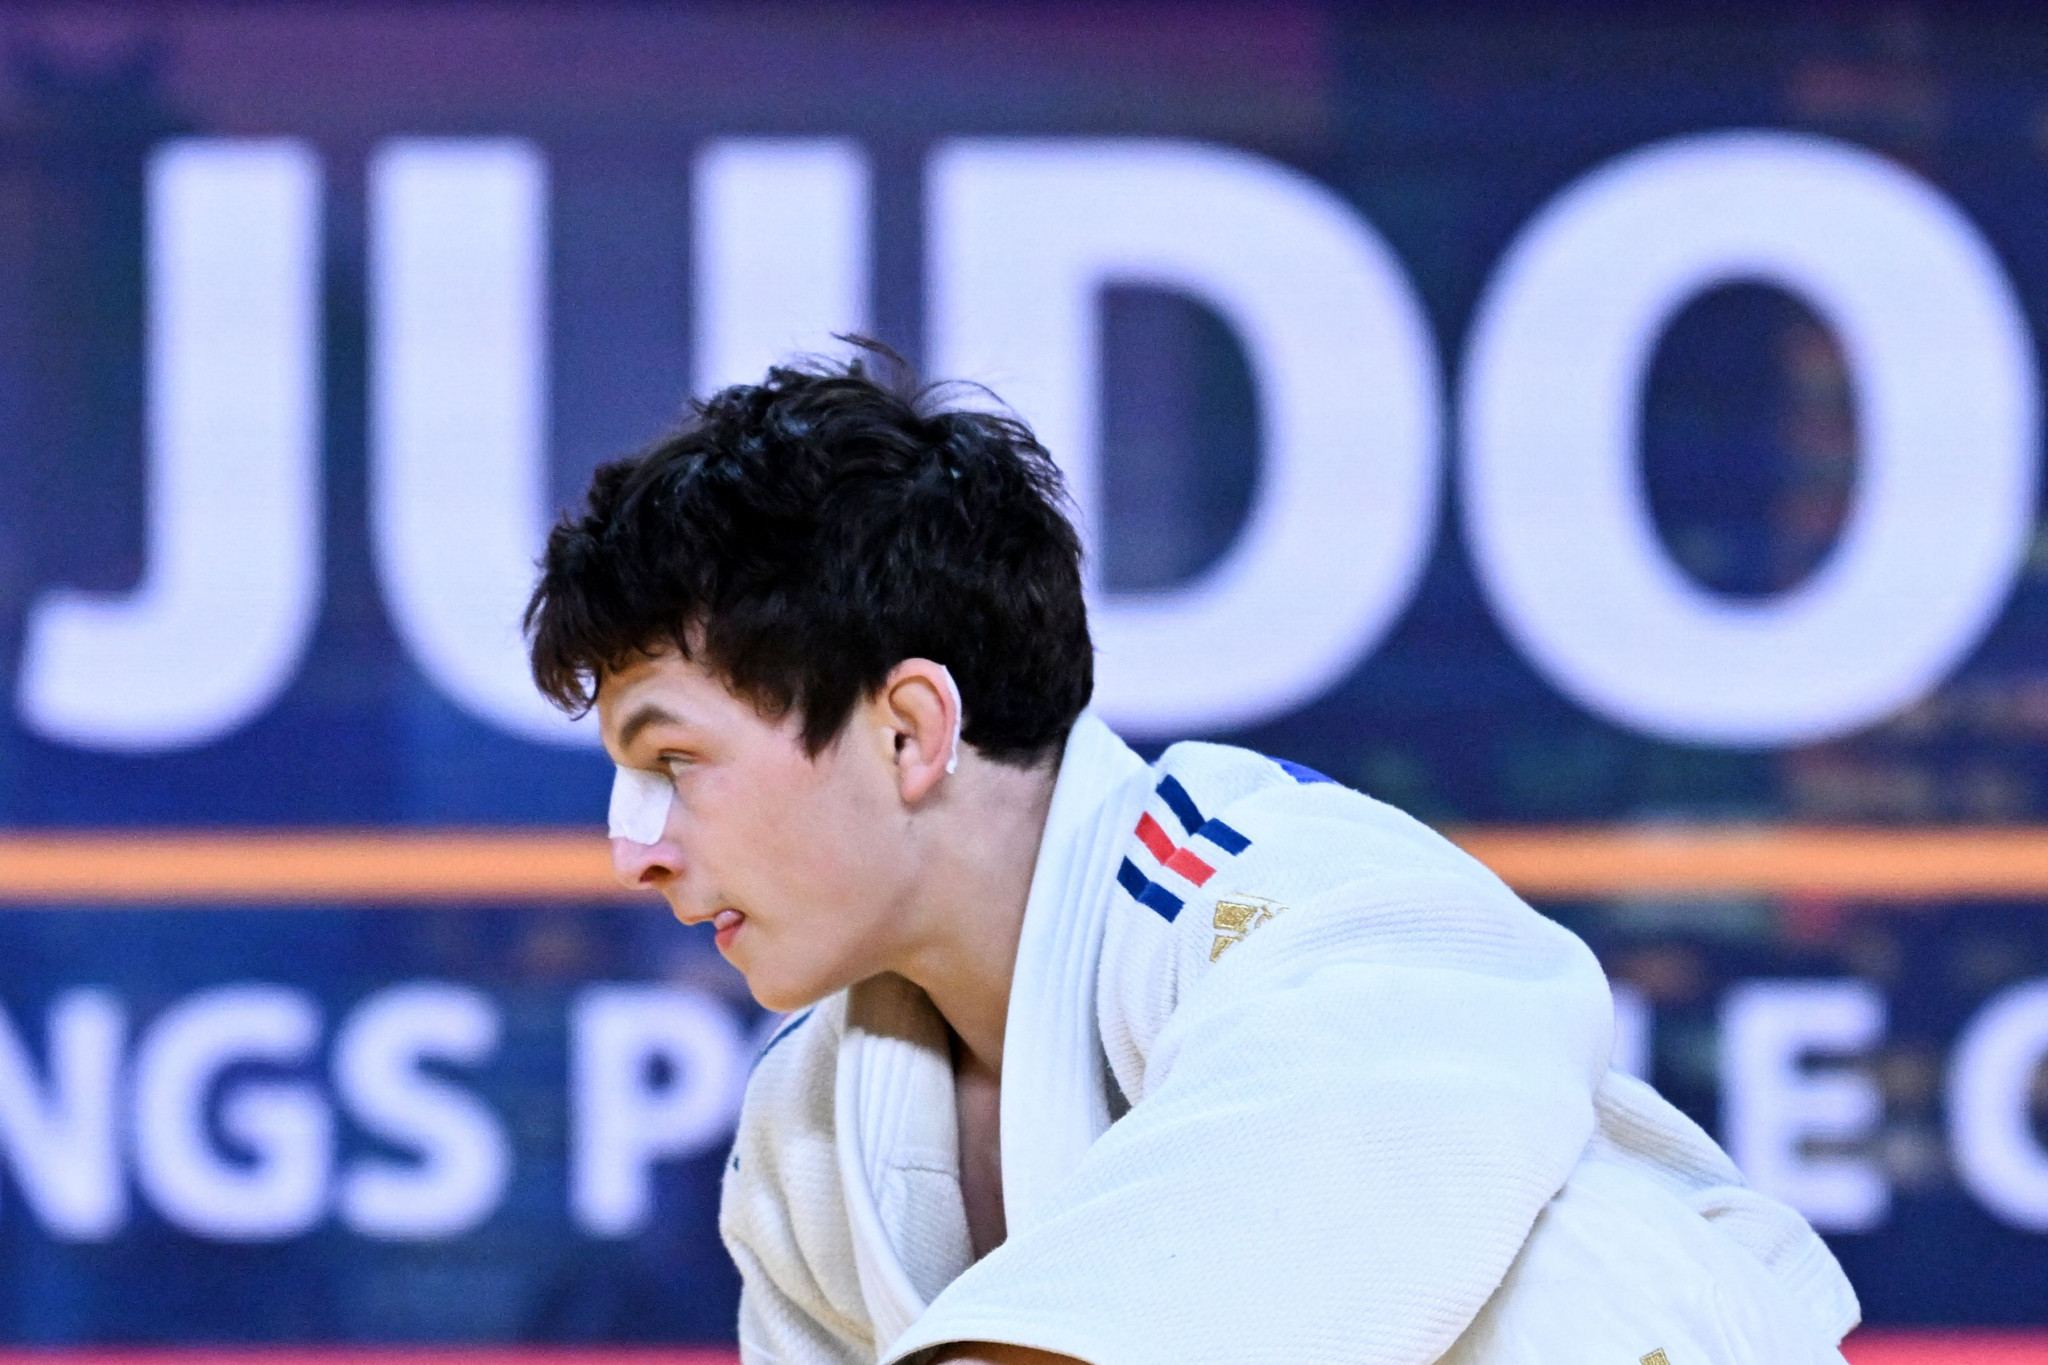 The 2021 European junior champion was dispatched by The Netherlands' Tornike Tsjakadoea in the second round ©Getty Images